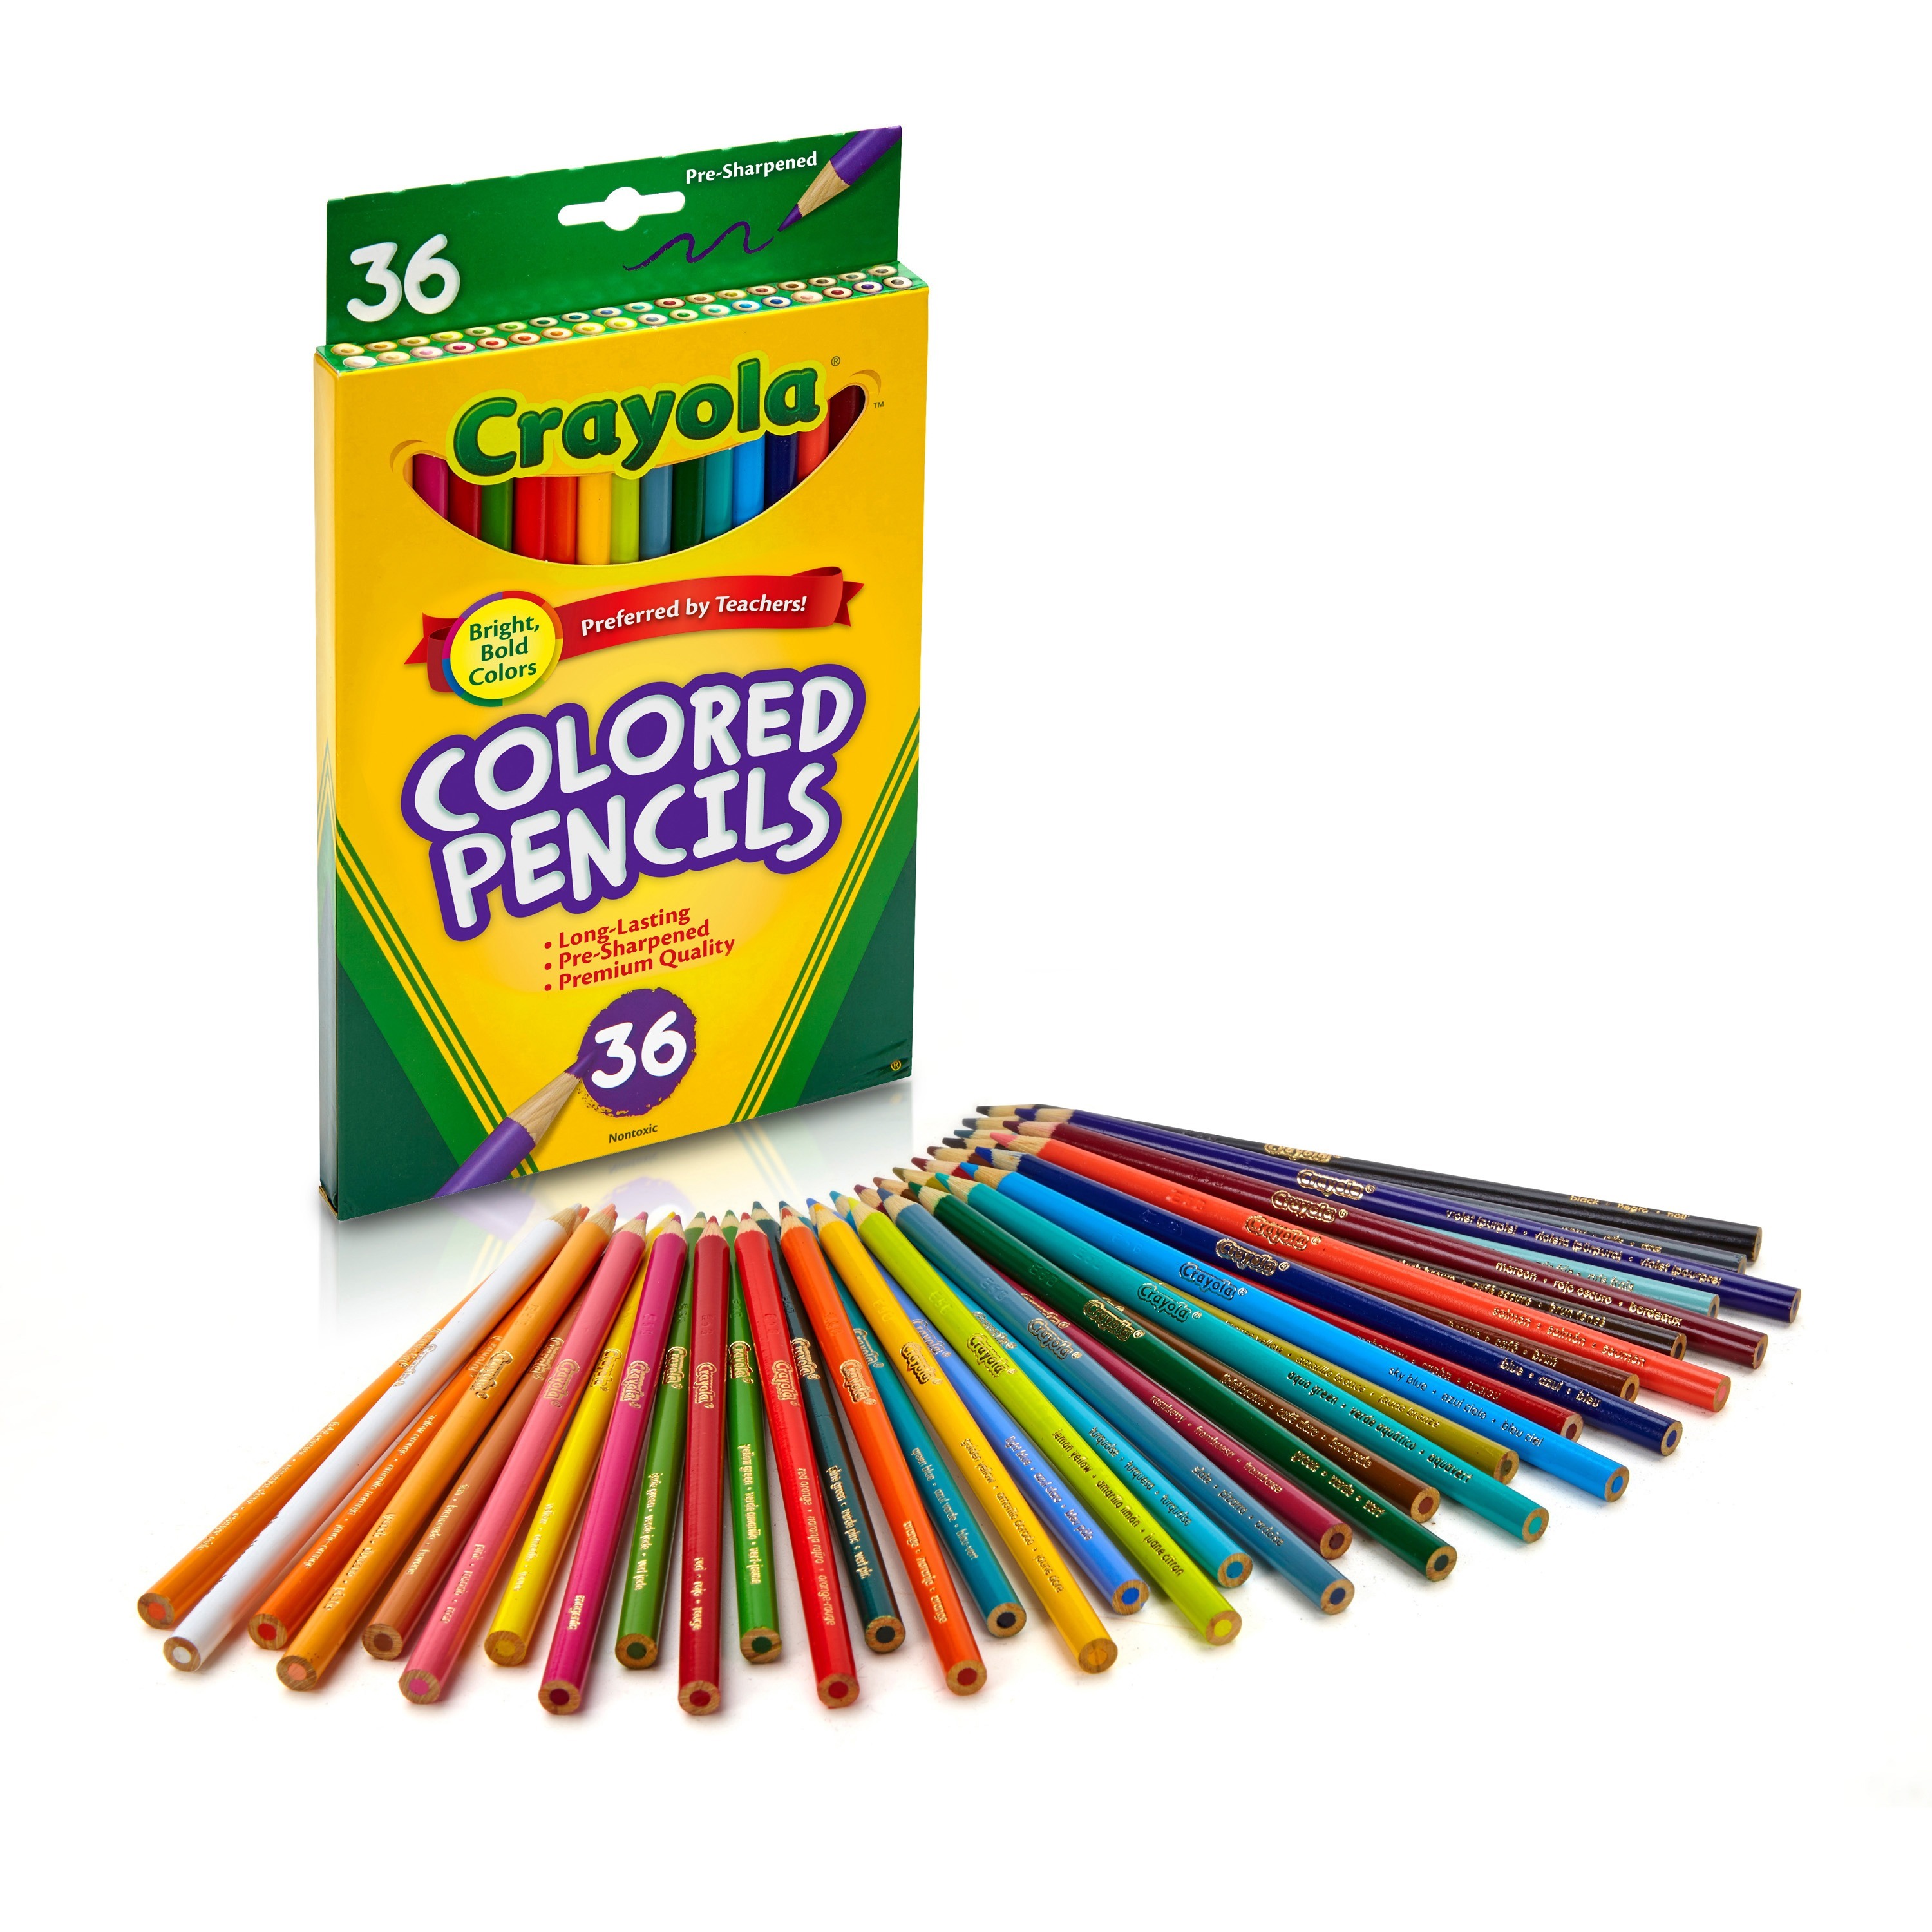 Wood　Lead　Crayola　Lead　Total　Colored　Diameter　3.3　mm　50　Presharpened　Assorted　West　Pencils　Crayola,　LLC　Colored　Barrel　of　Texas　Office　Pencils　Set　Solution